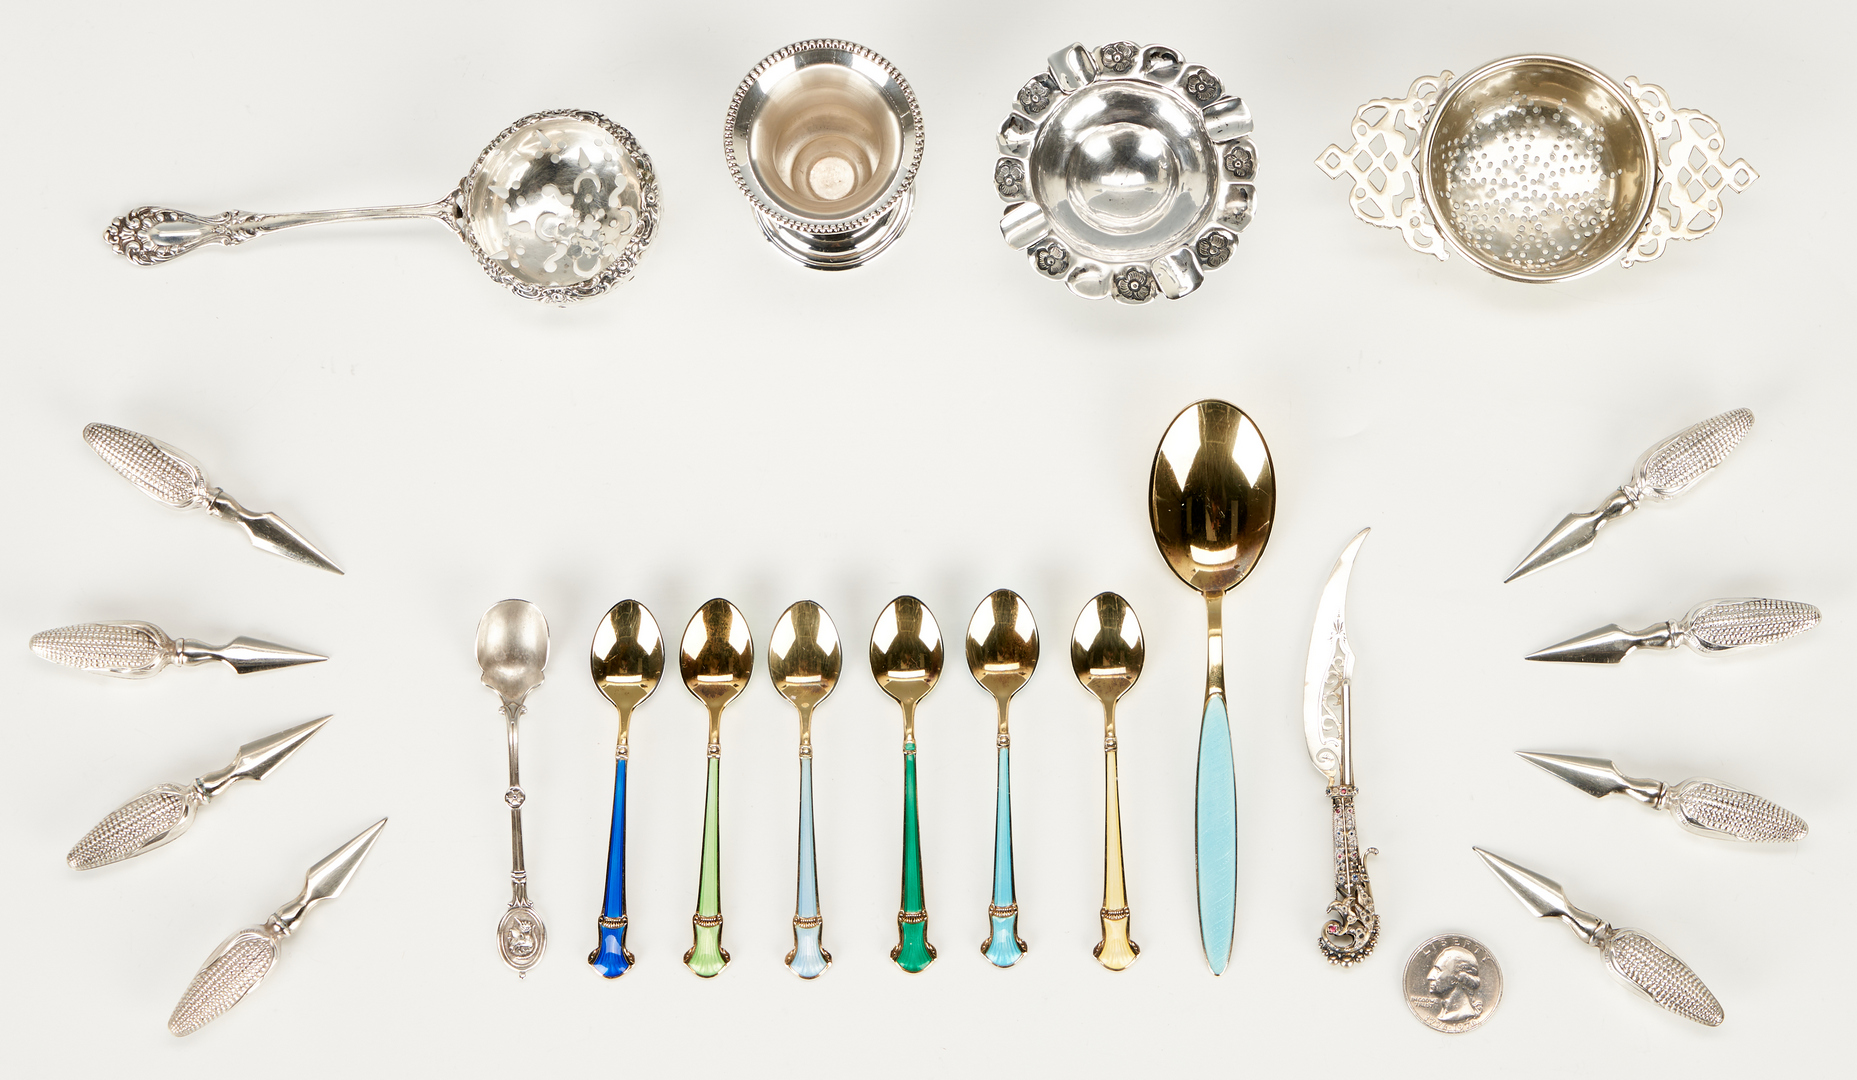 Lot 1171: 20 Pcs. Assorted Silver Items, Sterling & Silverplate Items